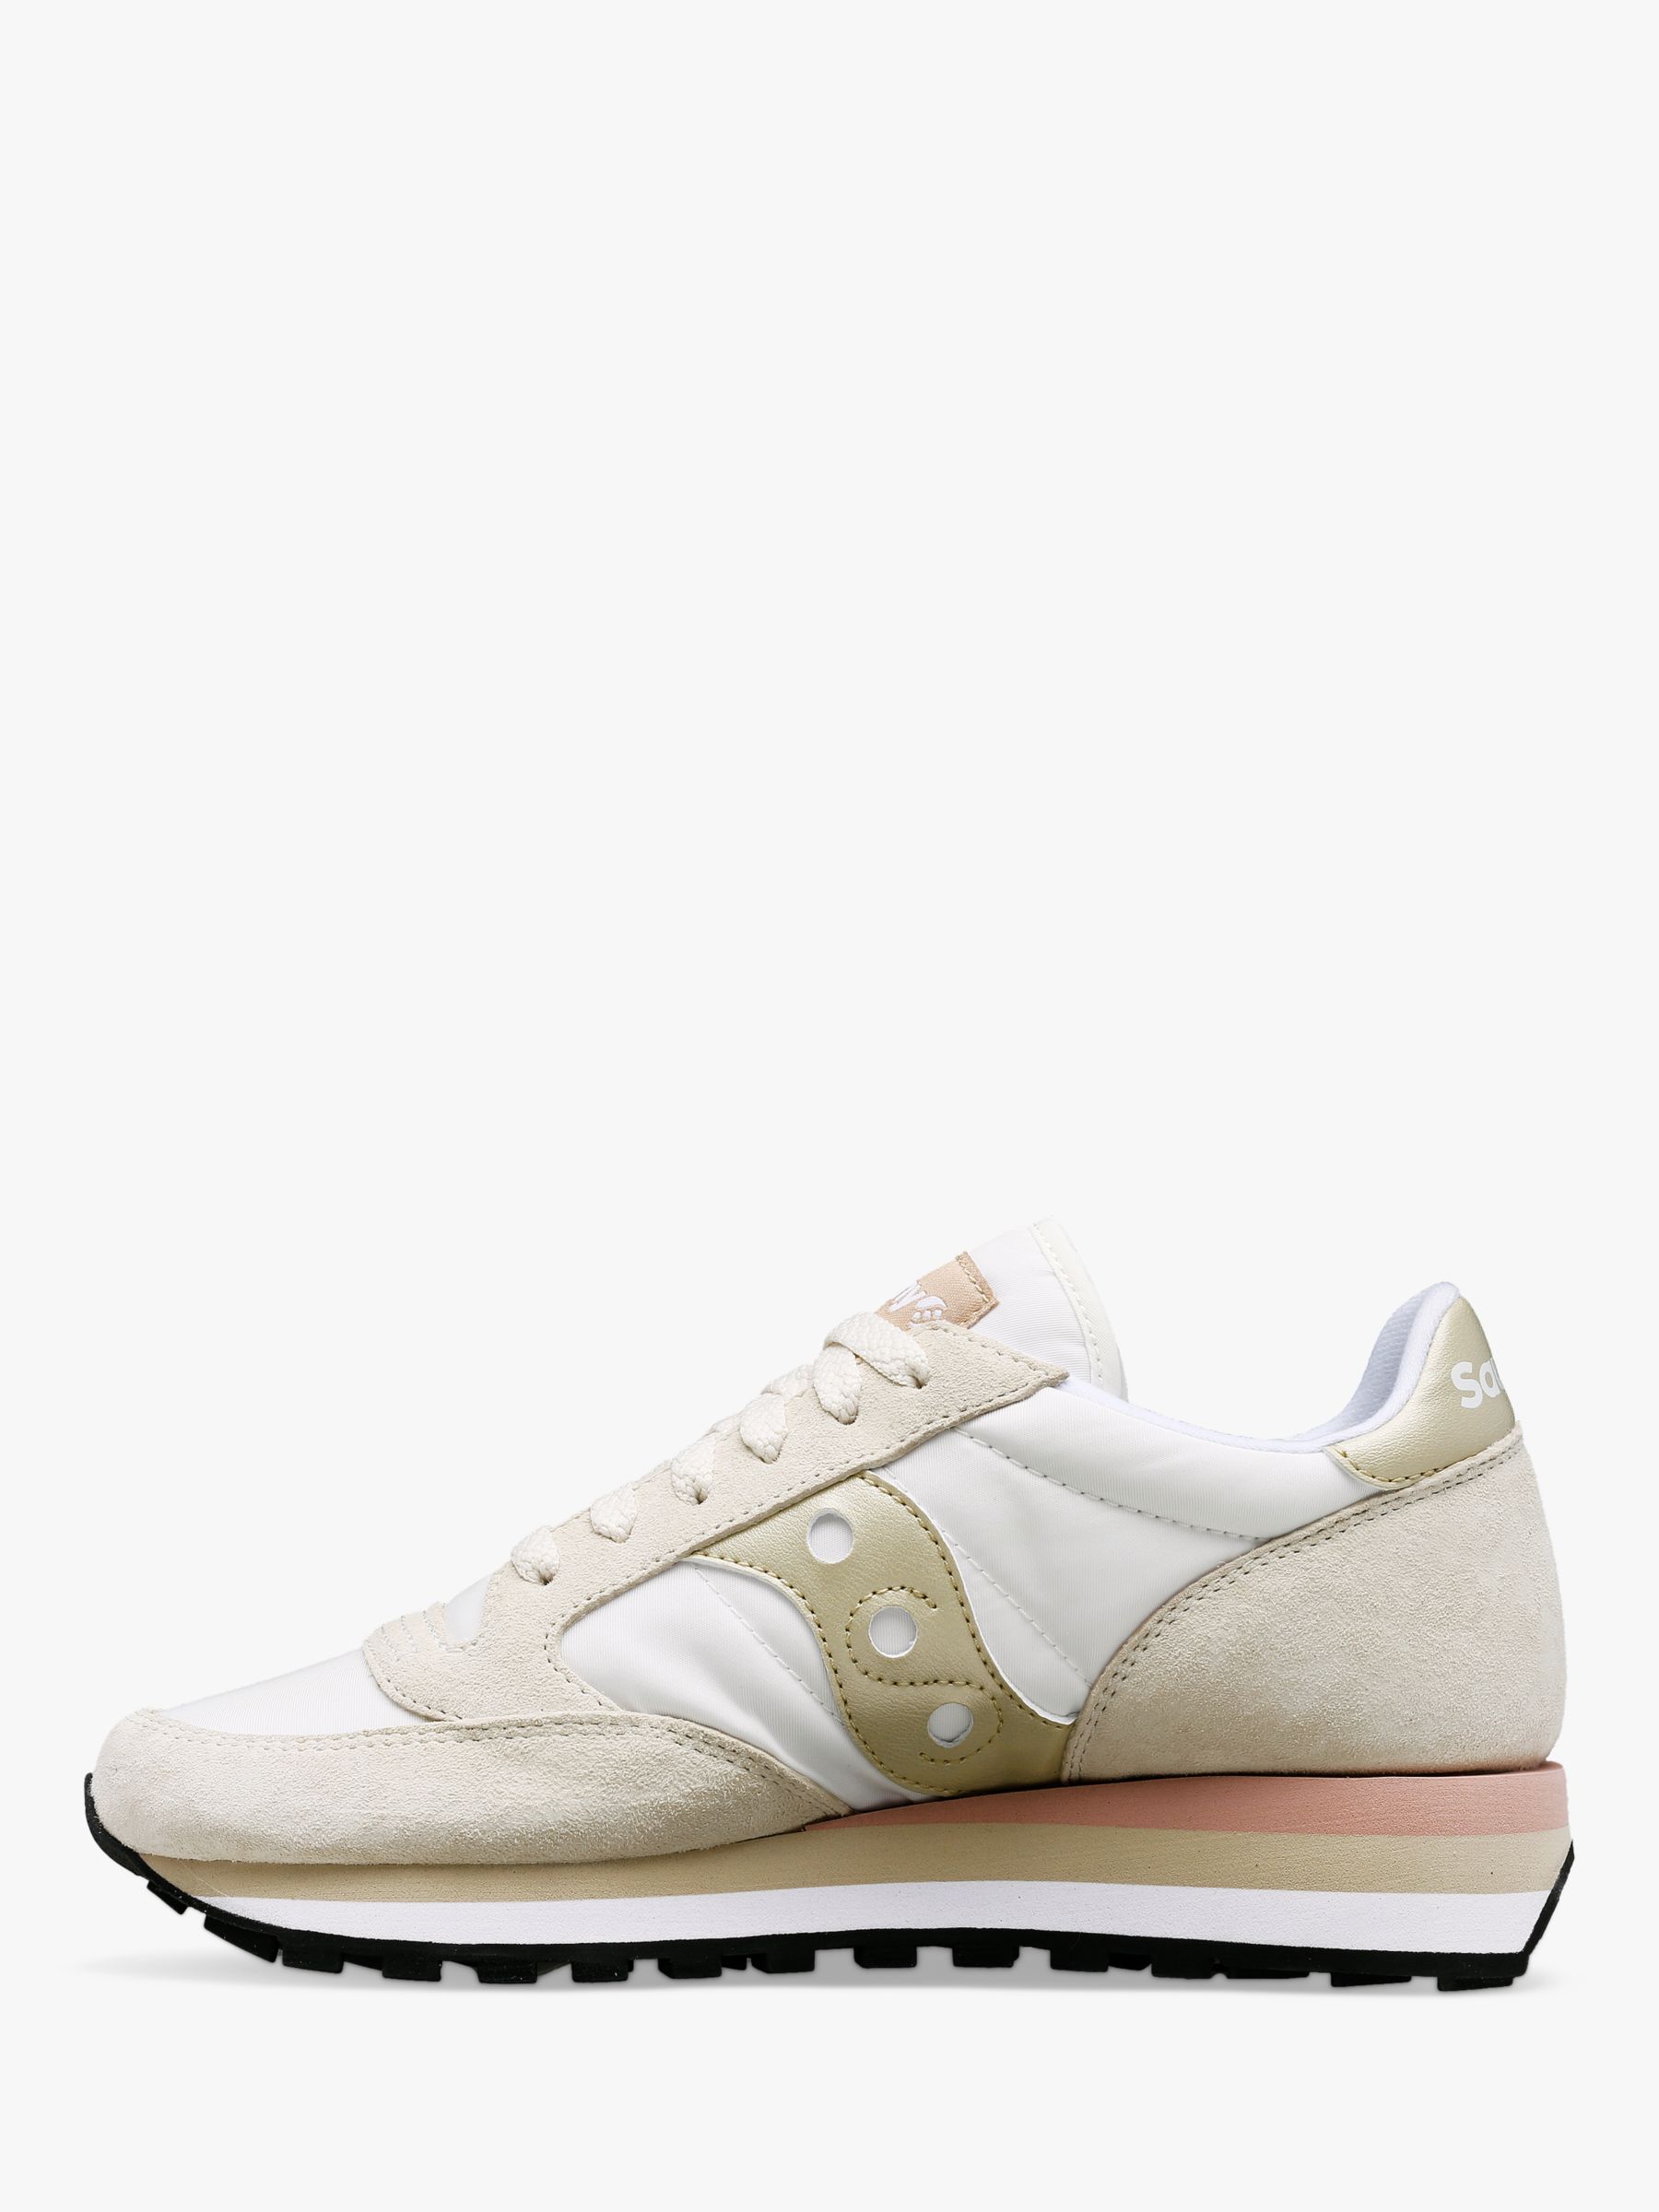 Buy Saucony Jazz Triple Leather Trainers, White/Gold Online at johnlewis.com